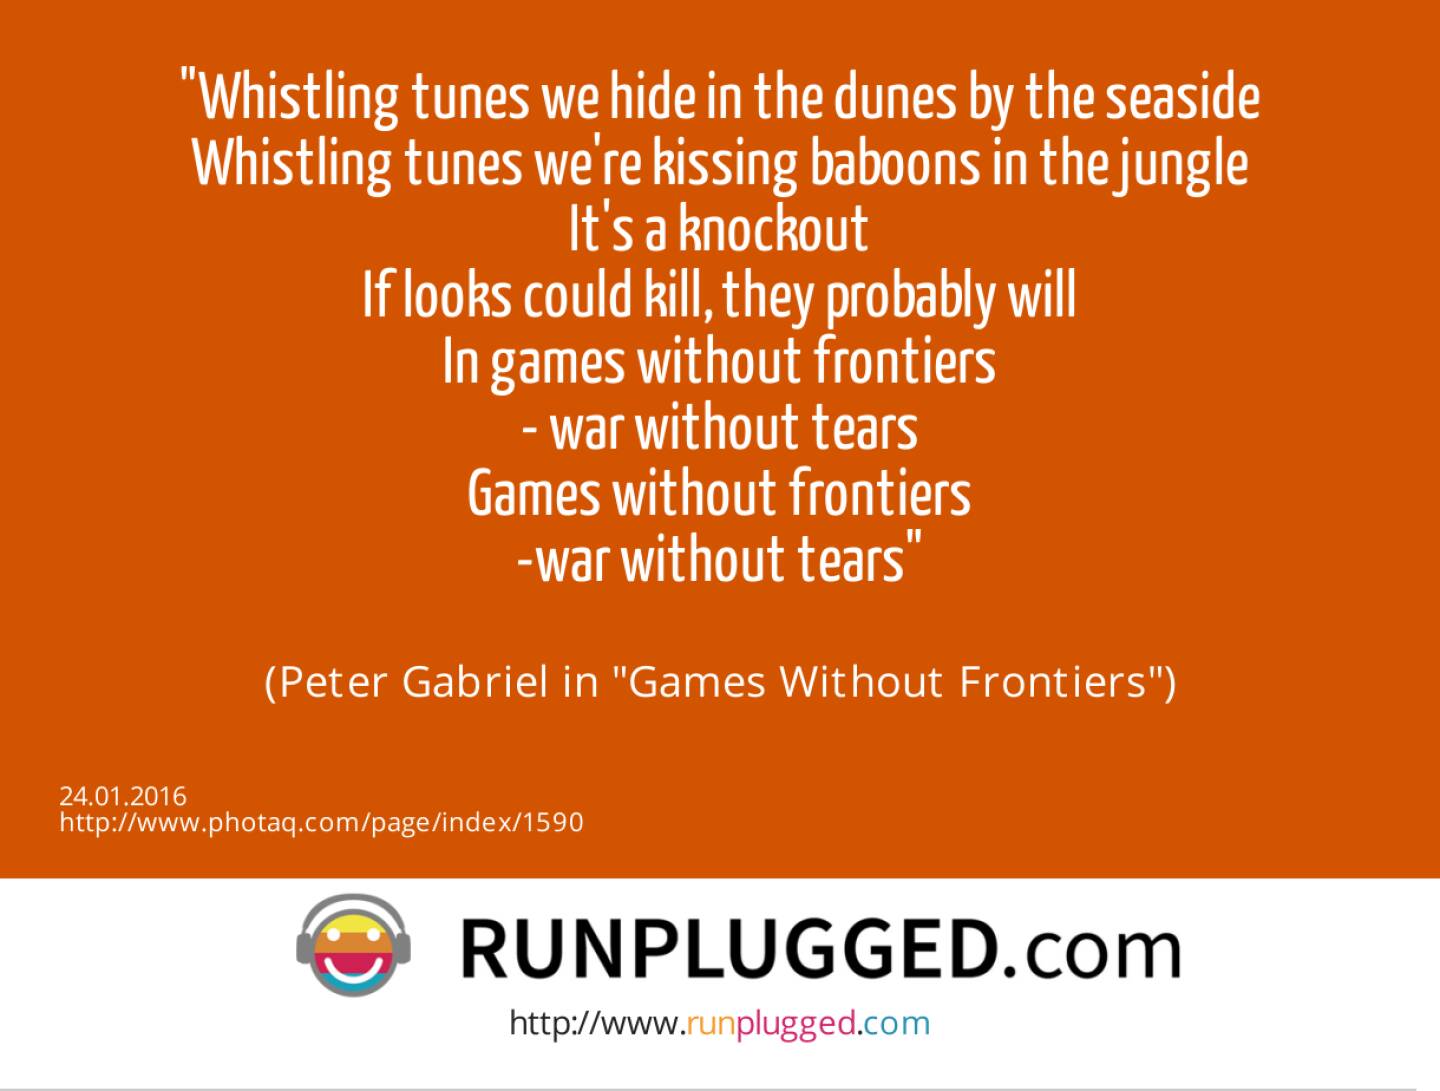 Whistling tunes we hide in the dunes by the seaside<br>Whistling tunes we're kissing baboons in the jungle<br>It's a knockout<br>If looks could kill, they probably will<br>In games without frontiers<br>- war without tears<br>Games without frontiers<br>-war without tears<br><br> (Peter Gabriel in Games Without Frontiers)